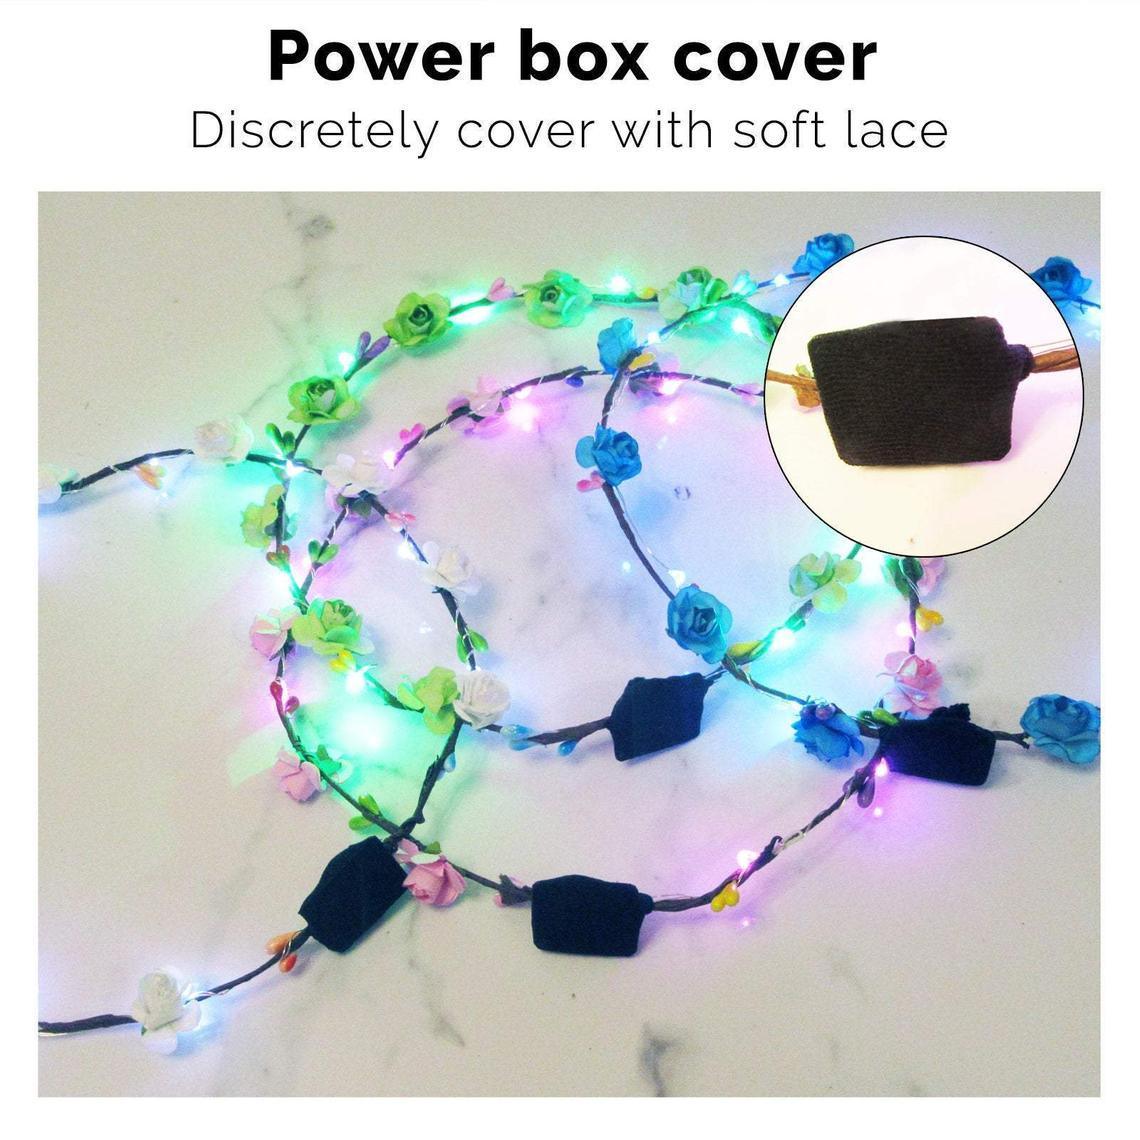 Led Flower Crown 20 Pieces Light Up Led Flower Wreath, Led Flower Headband For Bachelorette Party, Kids Birthday Party, Halloween - Decotree.co Online Shop